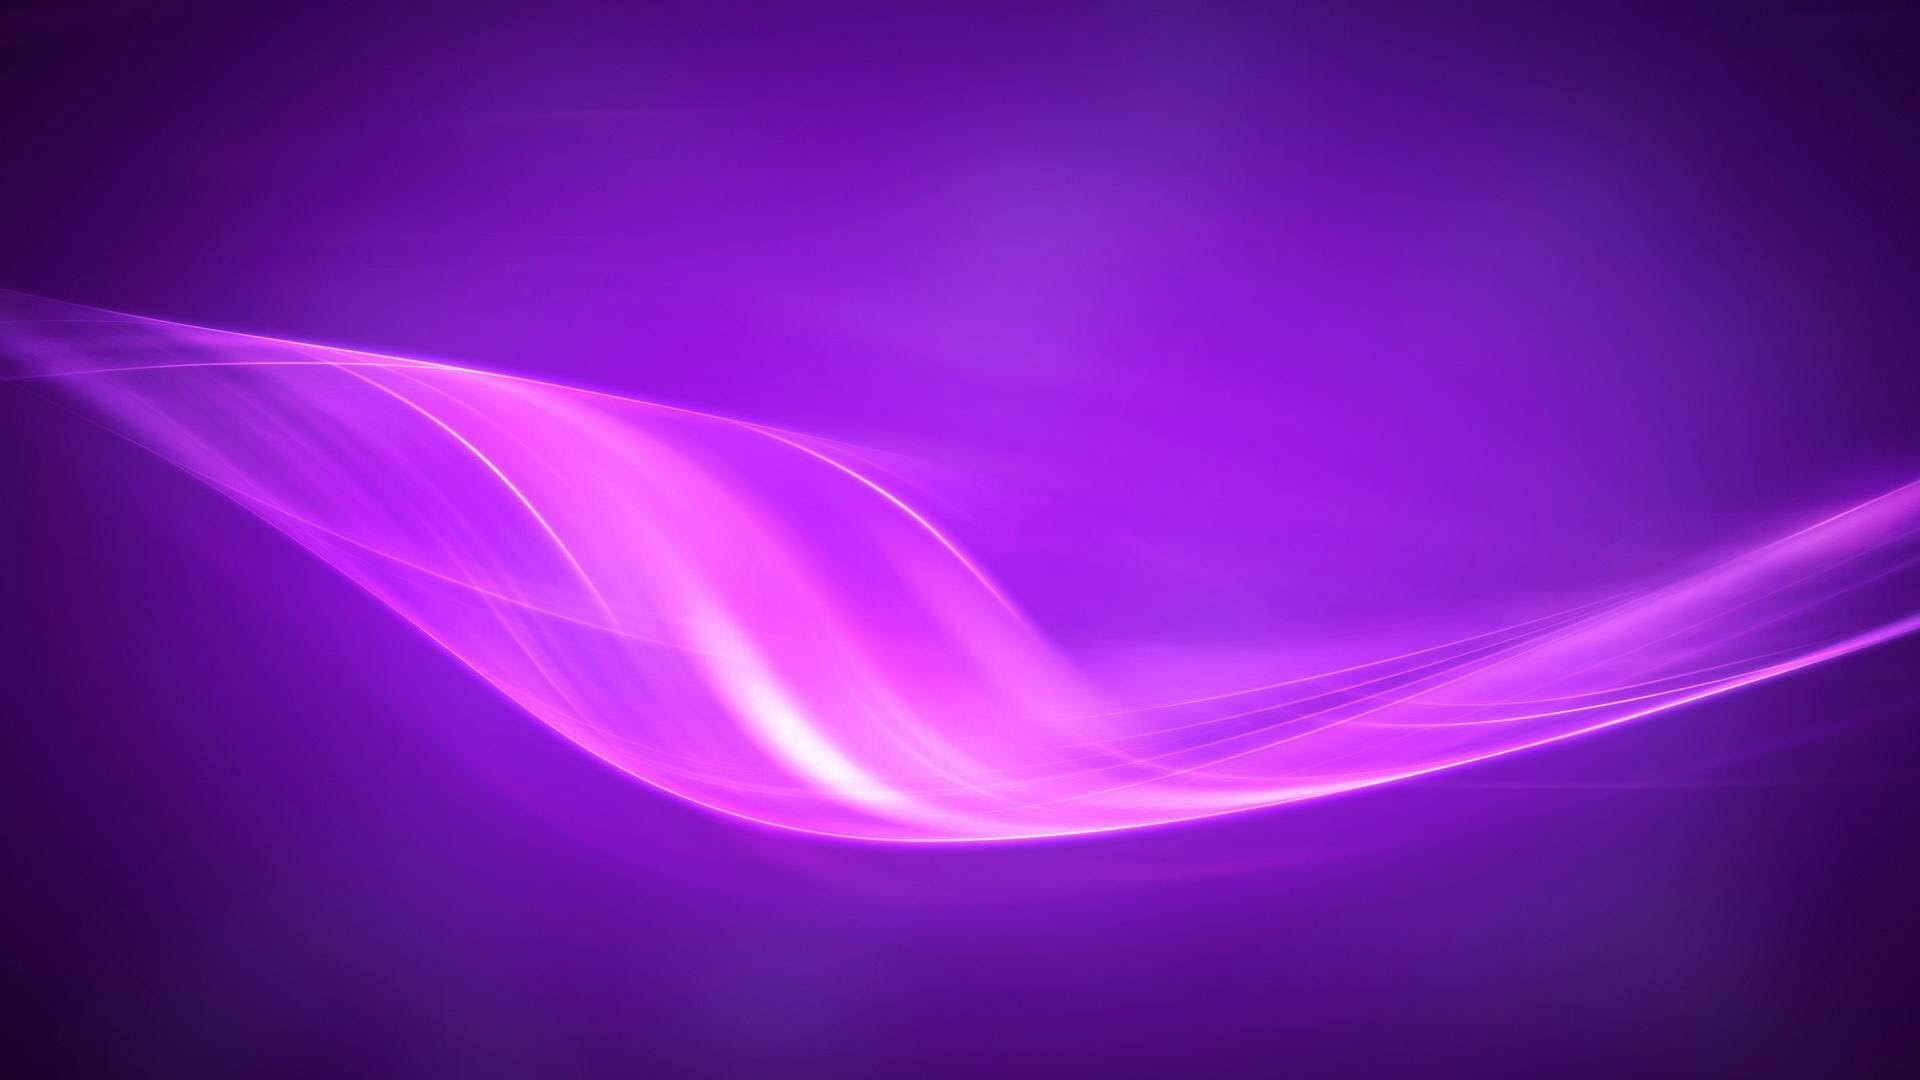 Wallpaper Purple With high-resolution 1920X1080 pixel. You can use this wallpaper for your Windows and Mac OS computers as well as your Android and iPhone smartphones